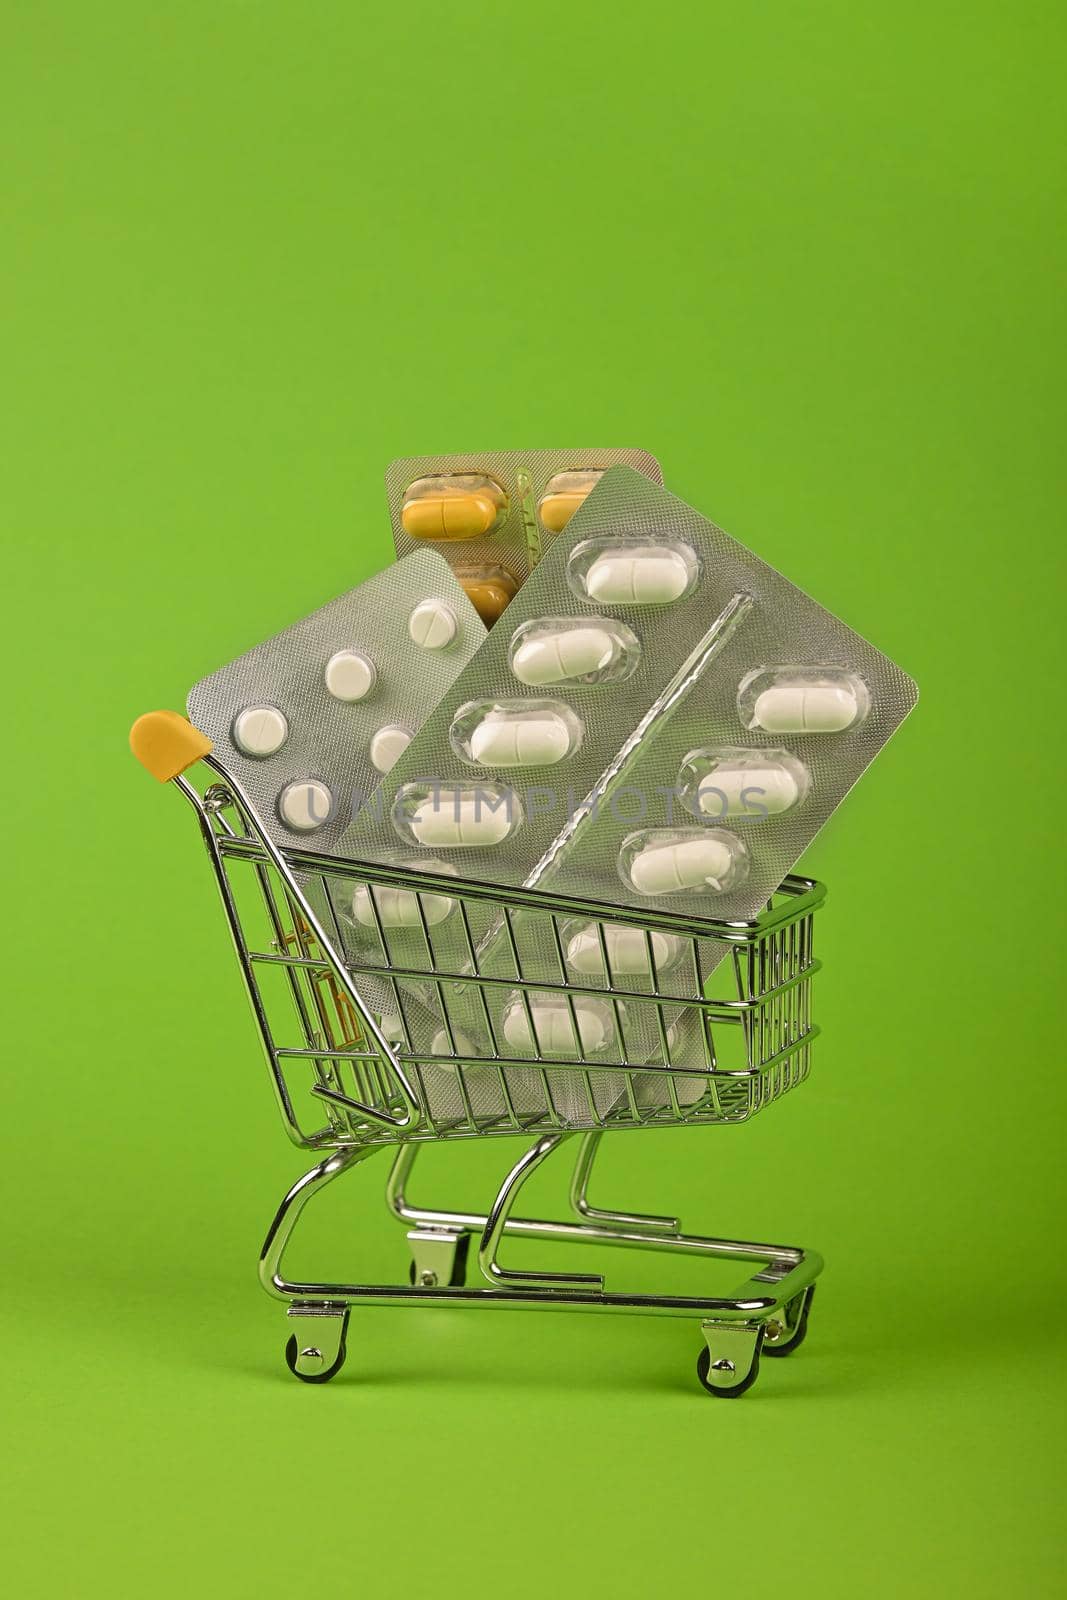 Several blister packs of pills in shopping cart by BreakingTheWalls